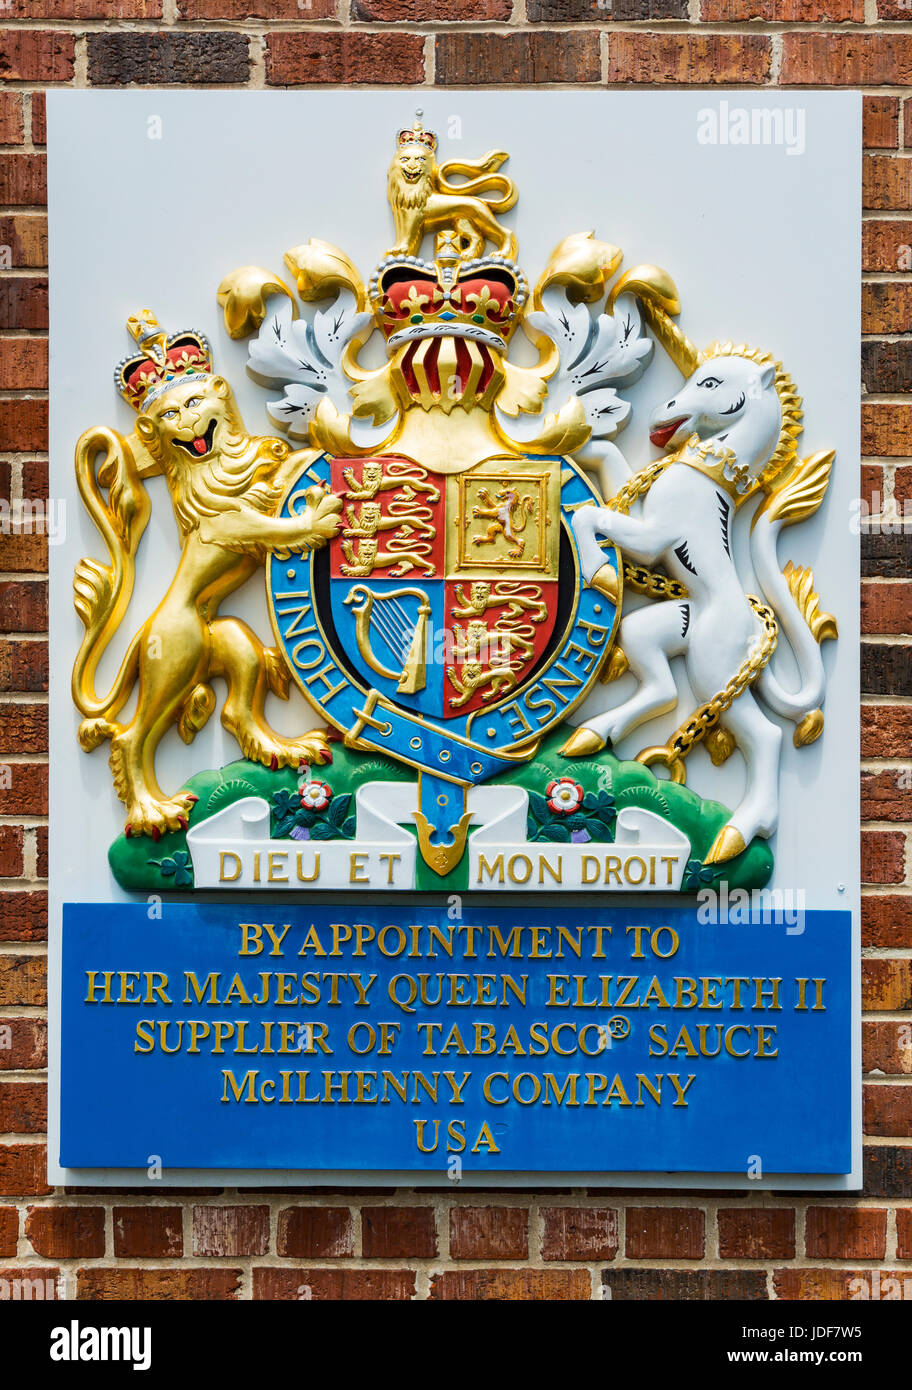 Louisiana, Avery Island, Tabasco Pepper Sauce  Factory, Queen Elizabeth II Royal Warrant of Appointment plaque Stock Photo